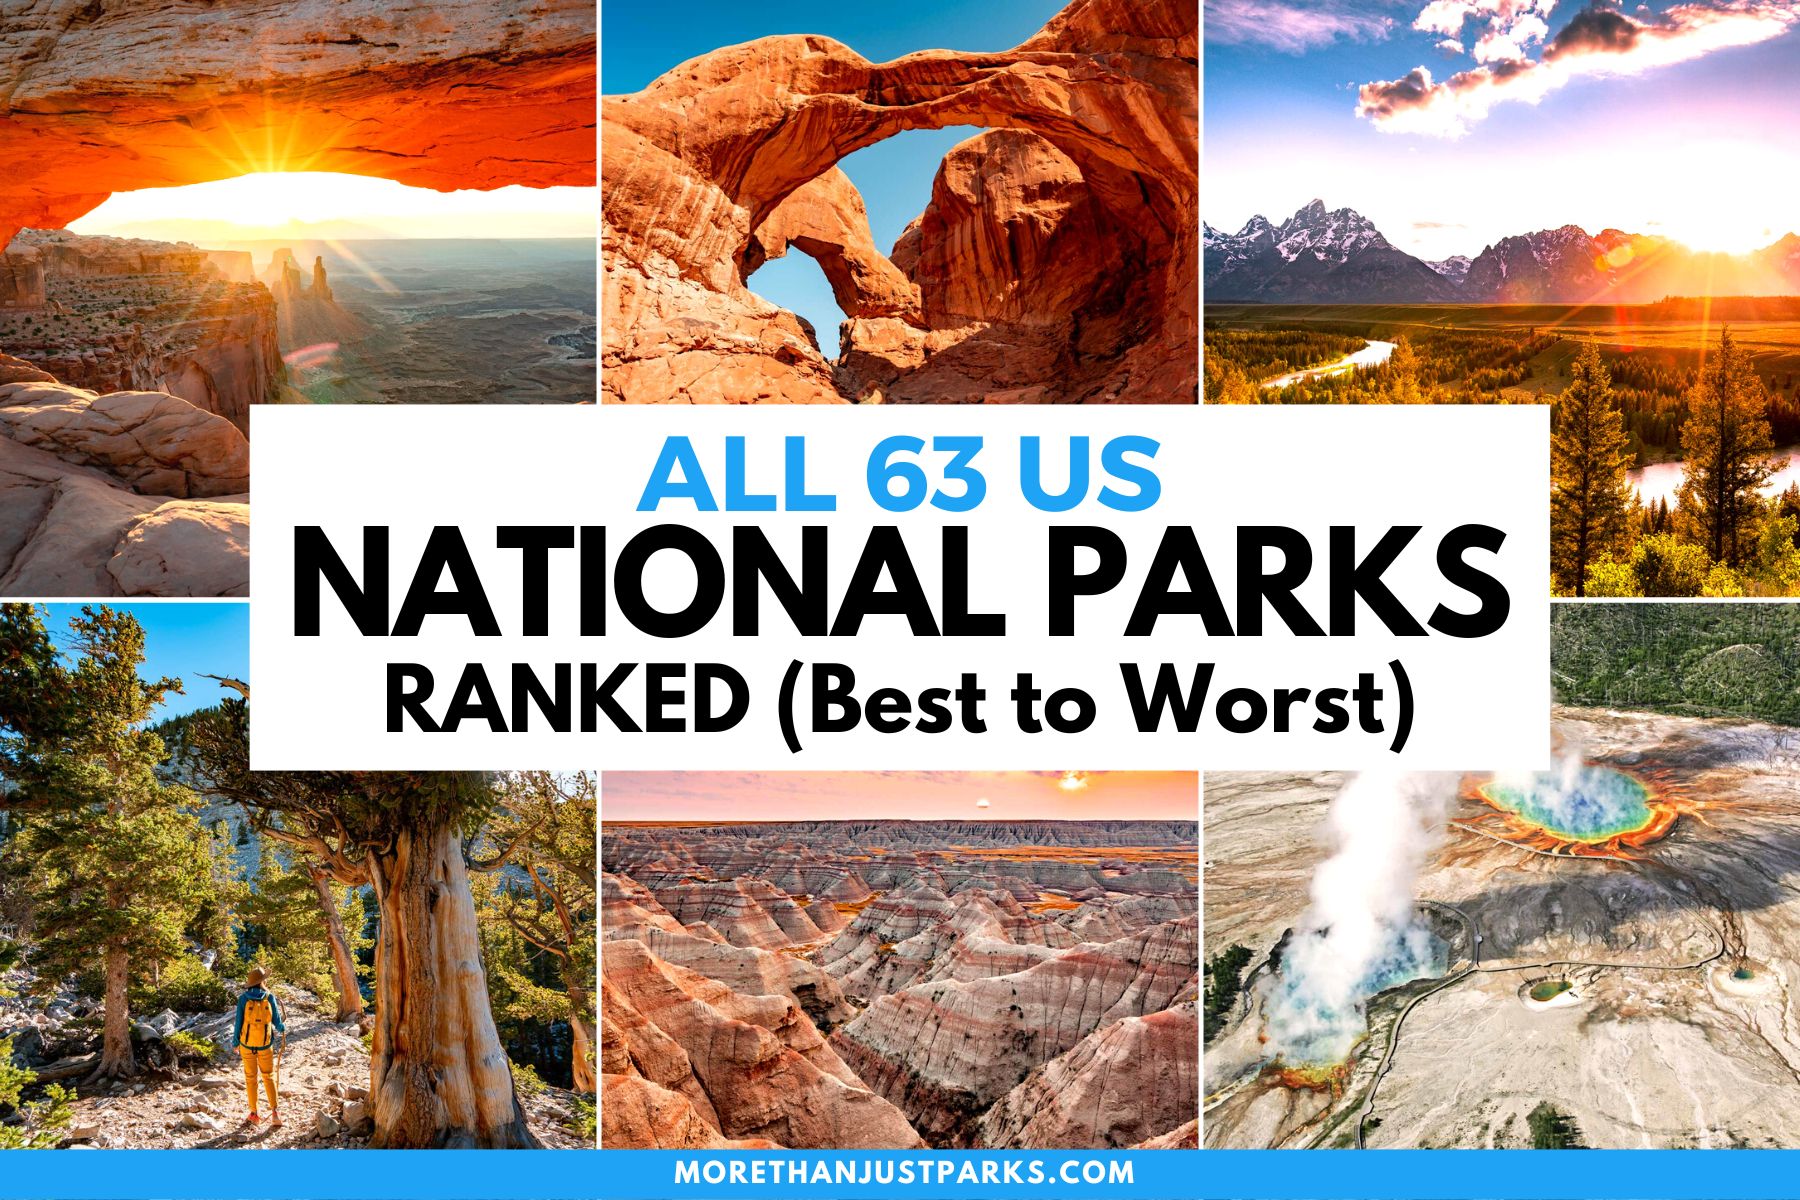 ALL 63 US NATIONAL PARKS Ranked by Experts (Best to Worst)